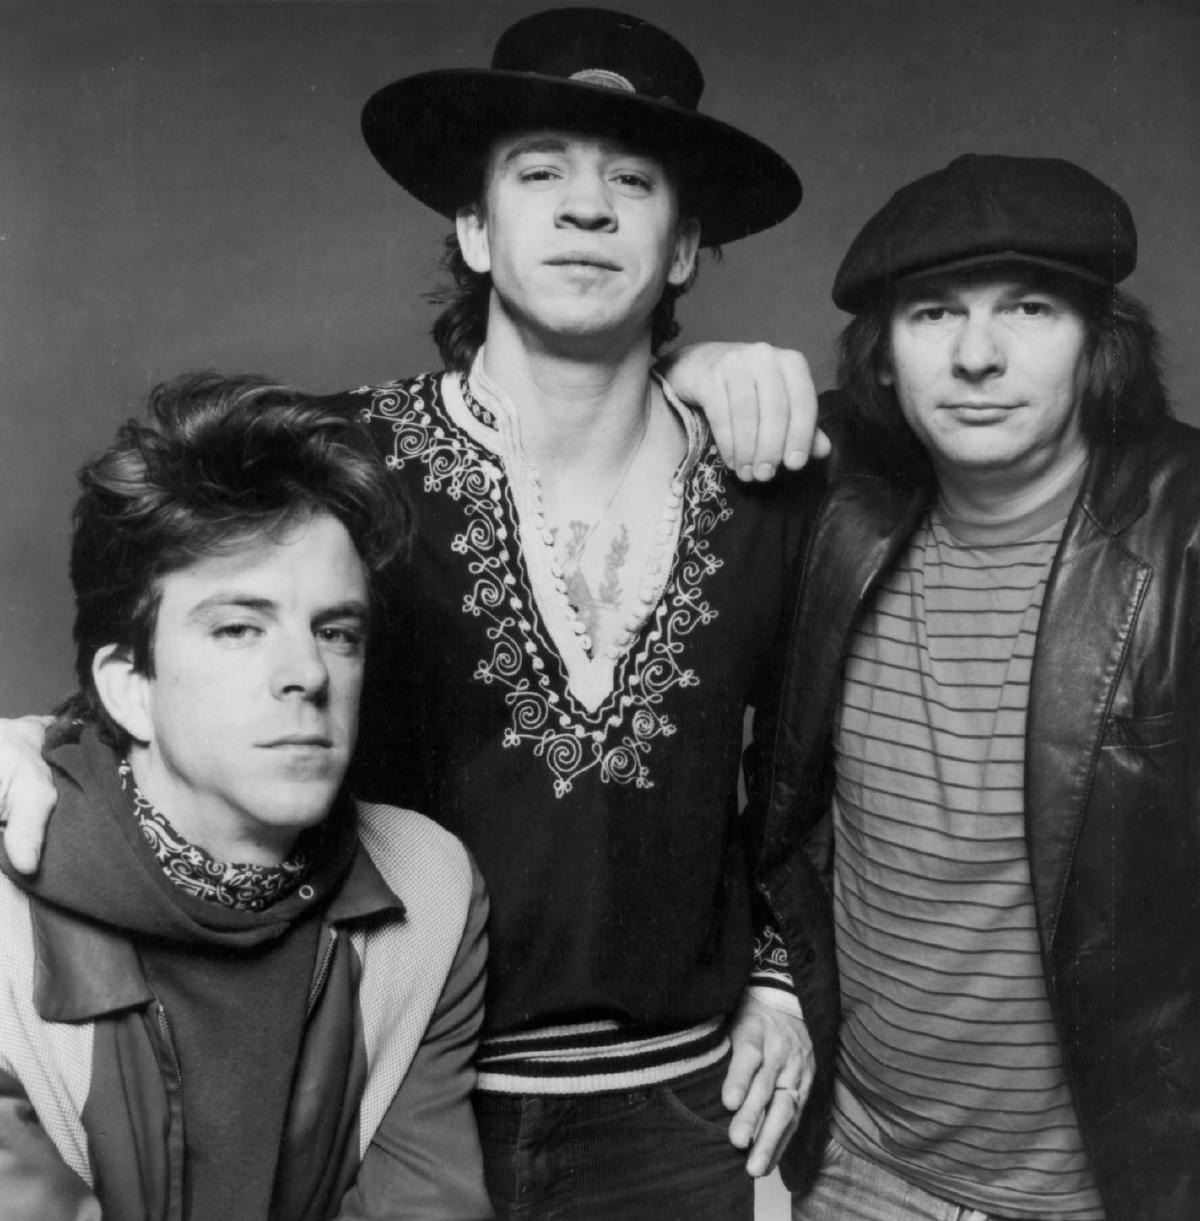 https://upload.wikimedia.org/wikipedia/commons/c/ce/Stevie_Ray_Vaughn_and_Double_Trouble_%281983_publicity_photo_by_Don_Hunstein%29.jpg